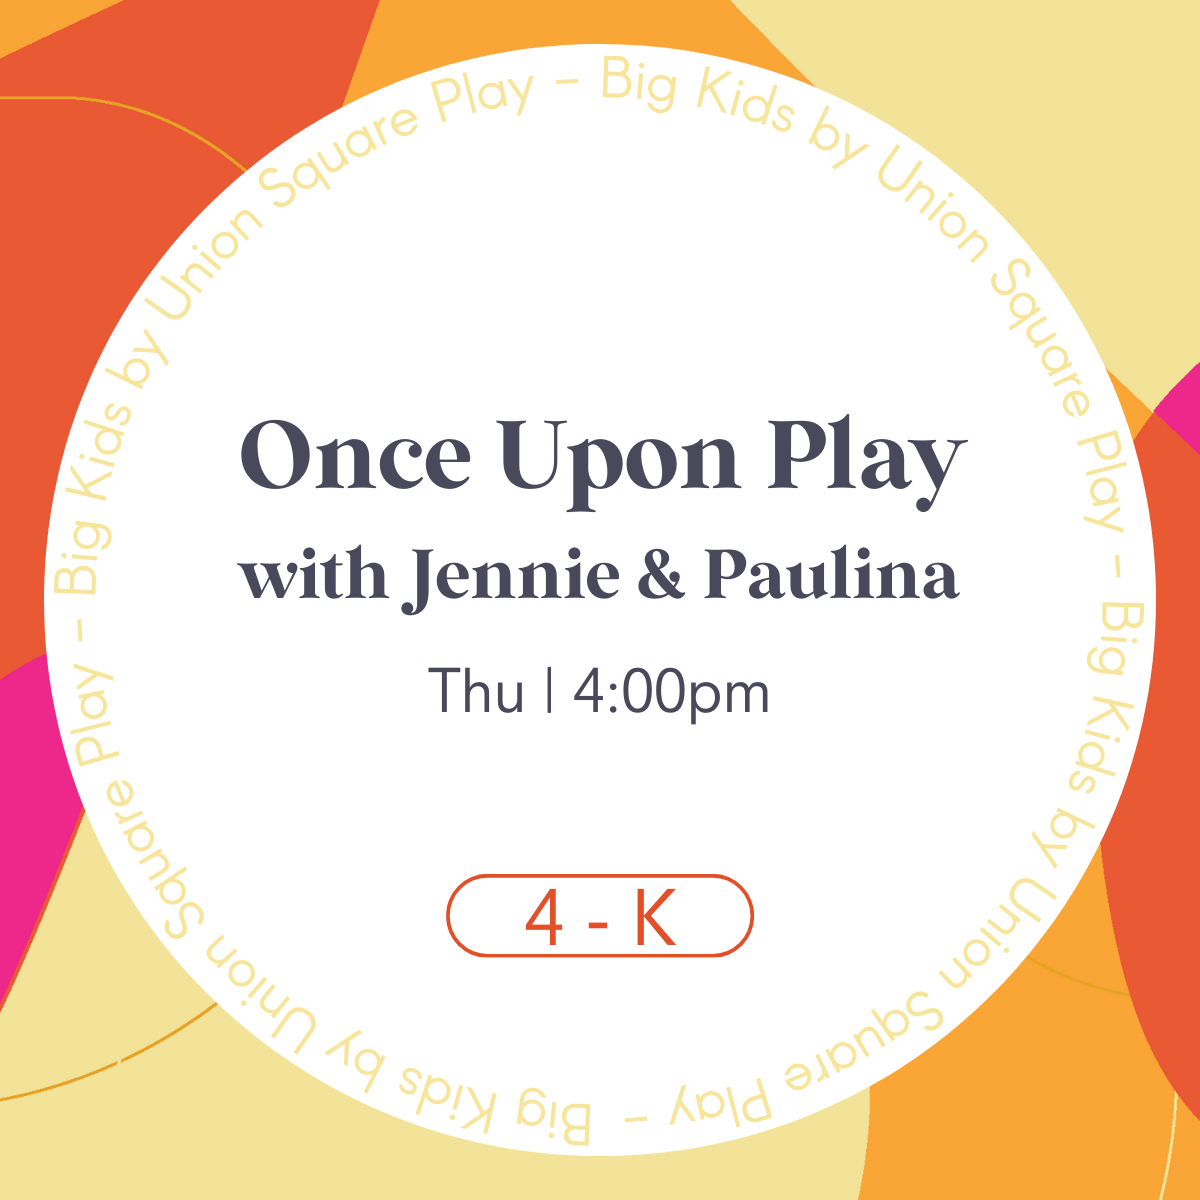 Once Upon Play with Jennie Monness - 4 years - K